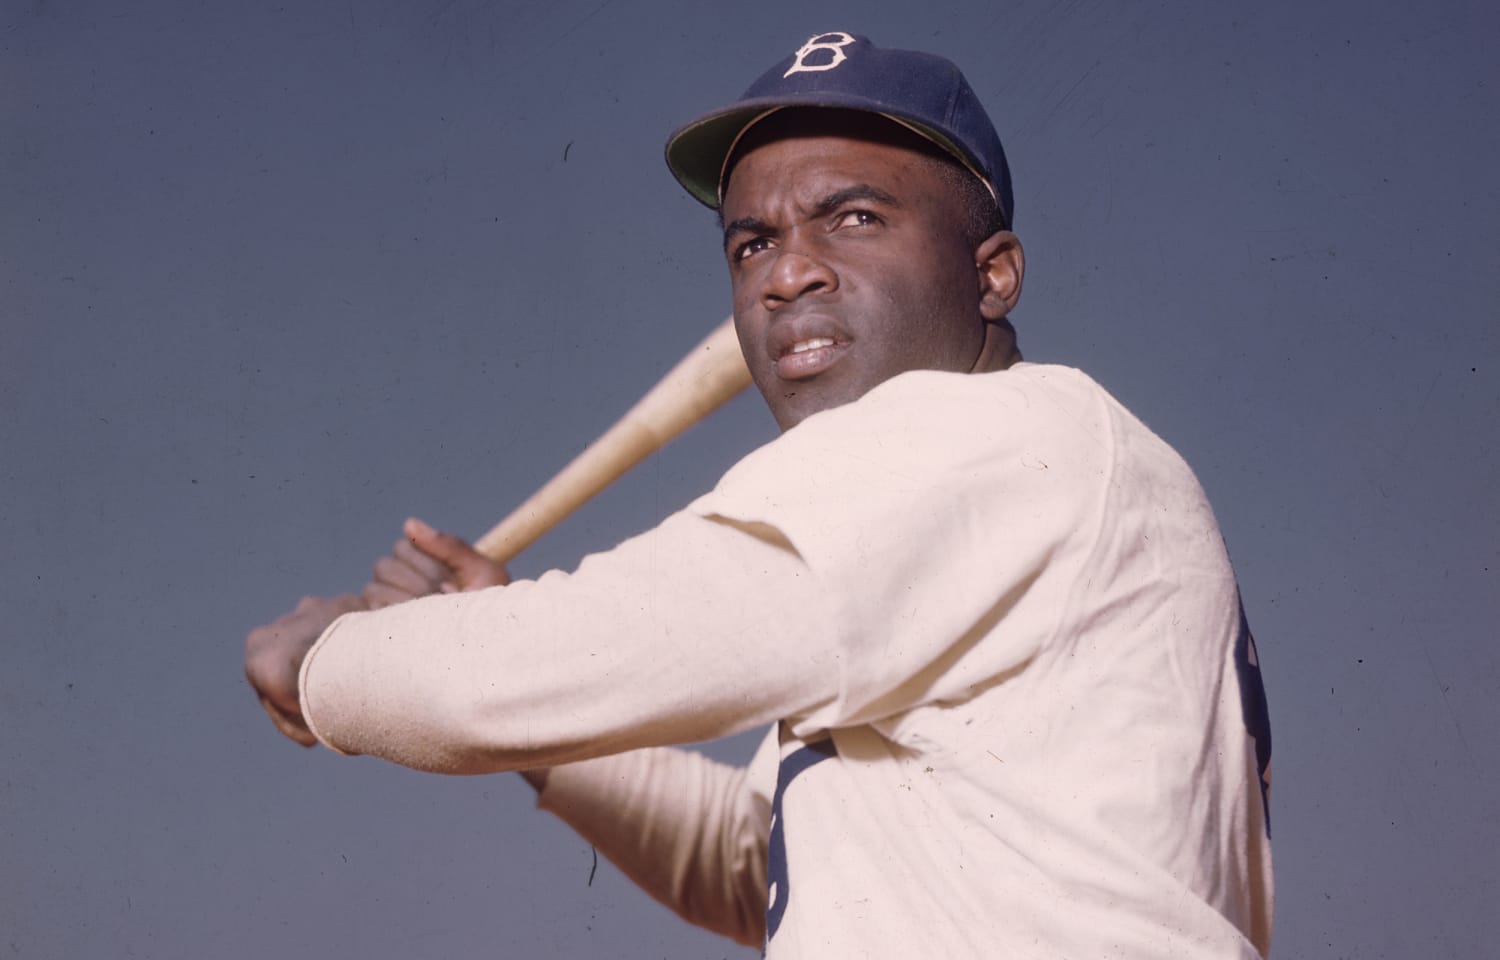 Reflections on a Jackie Robinson Day like no other